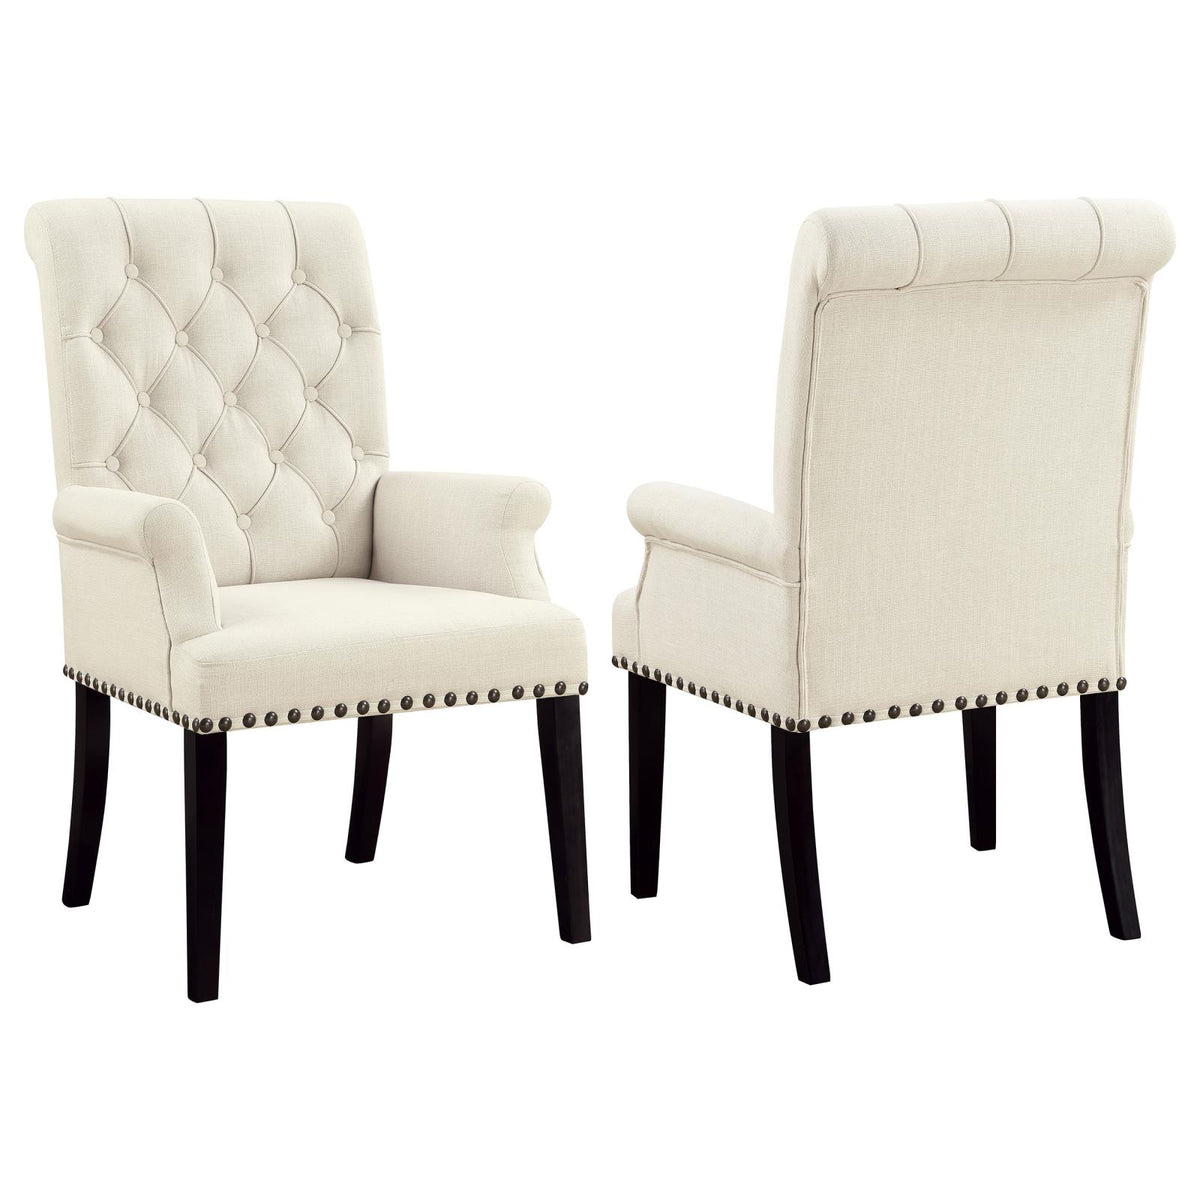 Alana Tufted Back Upholstered Arm Chair Beige  Las Vegas Furniture Stores